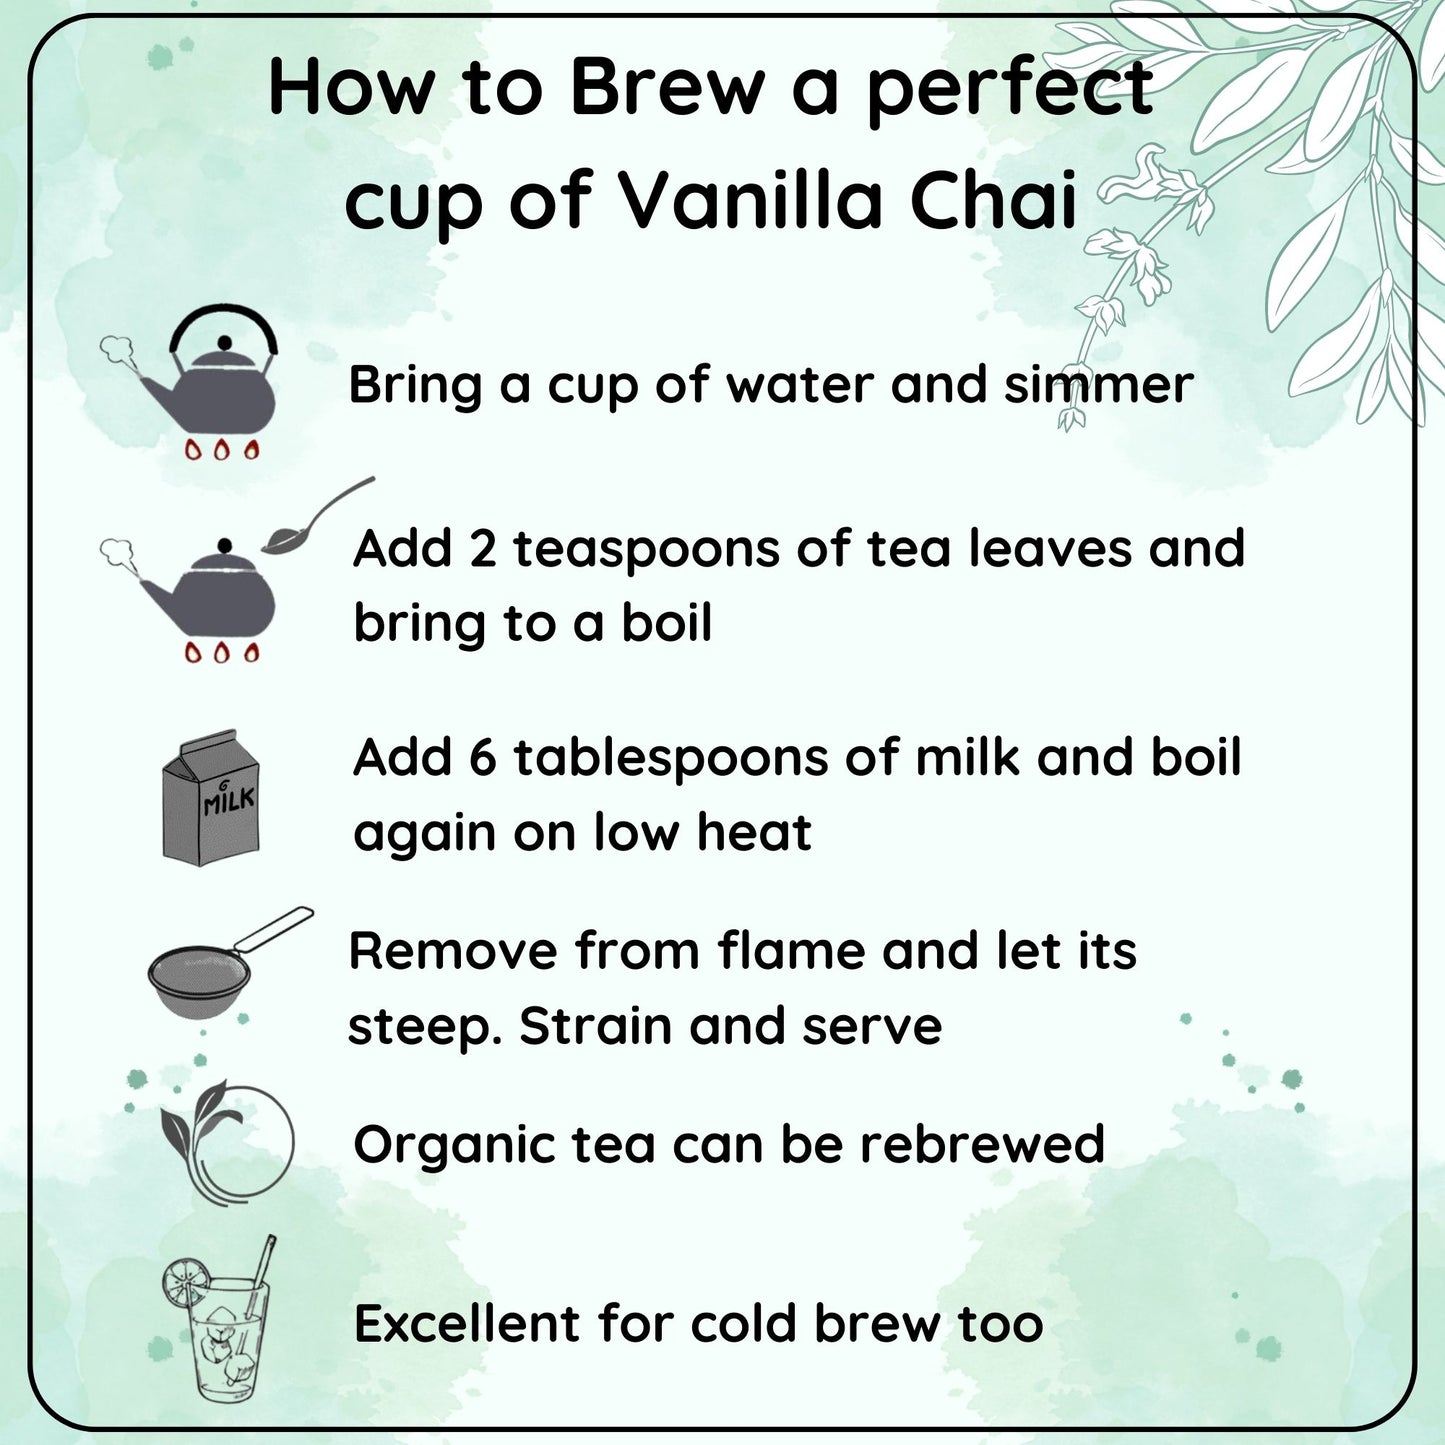 RELAXING Vanilla Chai - How Vanilla Chai Can Help You Relax and Unwind - Radhikas Fine Teas and Whatnots 